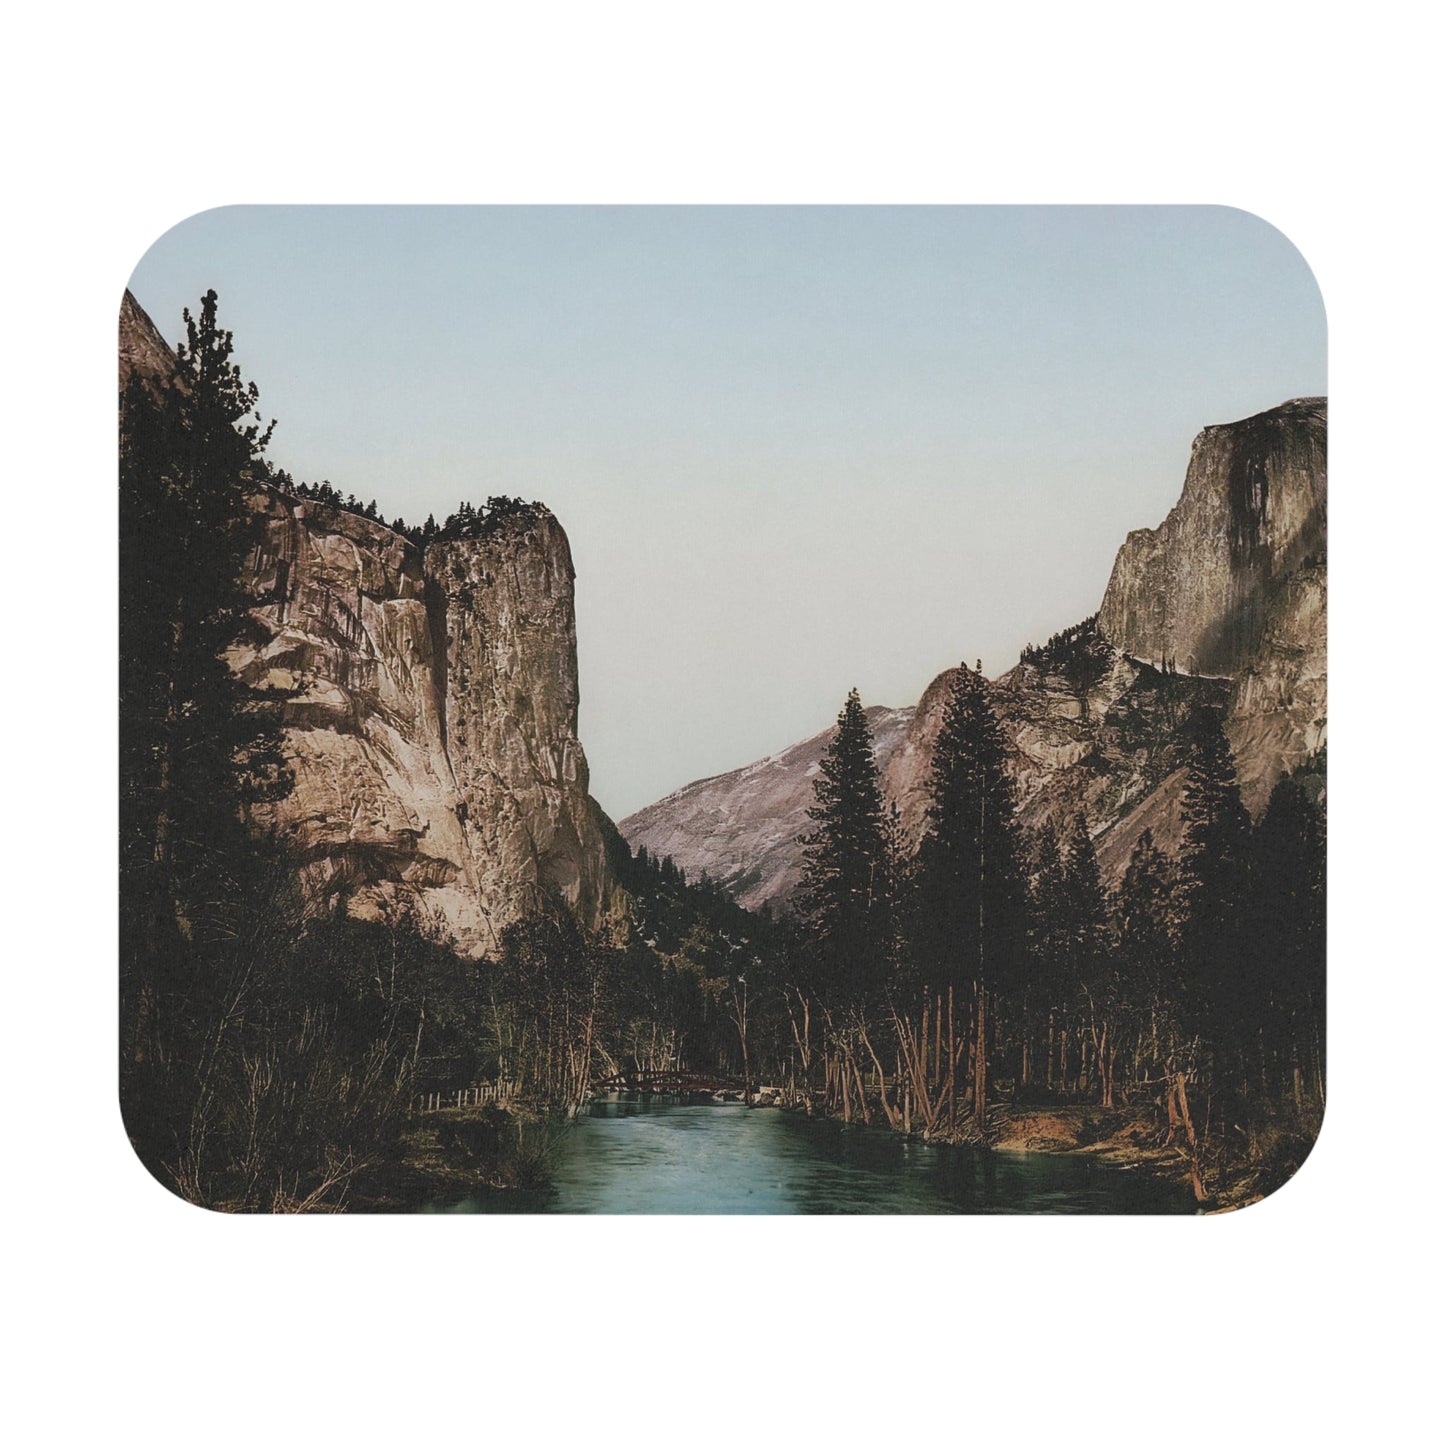 Yosemite National Park Mouse Pad with Half Dome art, desk and office decor featuring iconic Yosemite landscapes.